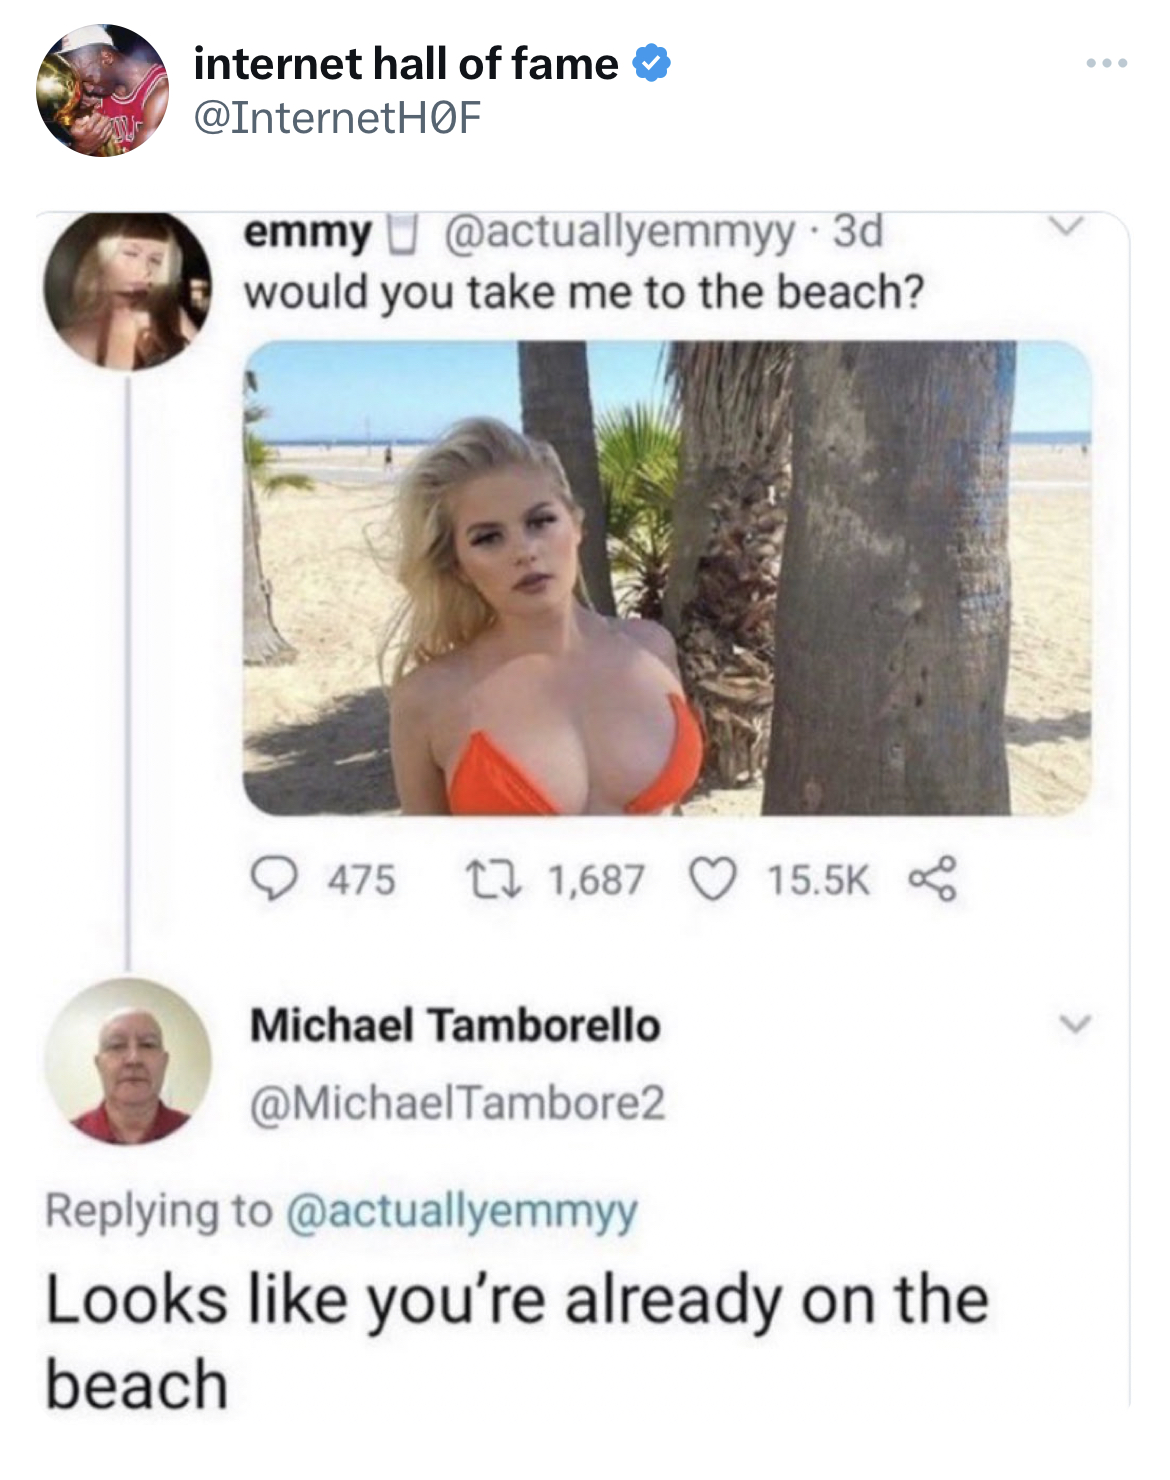 savage tweets - photo caption - internet hall of fame emmy . 3d would you take me to the beach? 475 1,687 Michael Tamborello Looks you're already on the beach